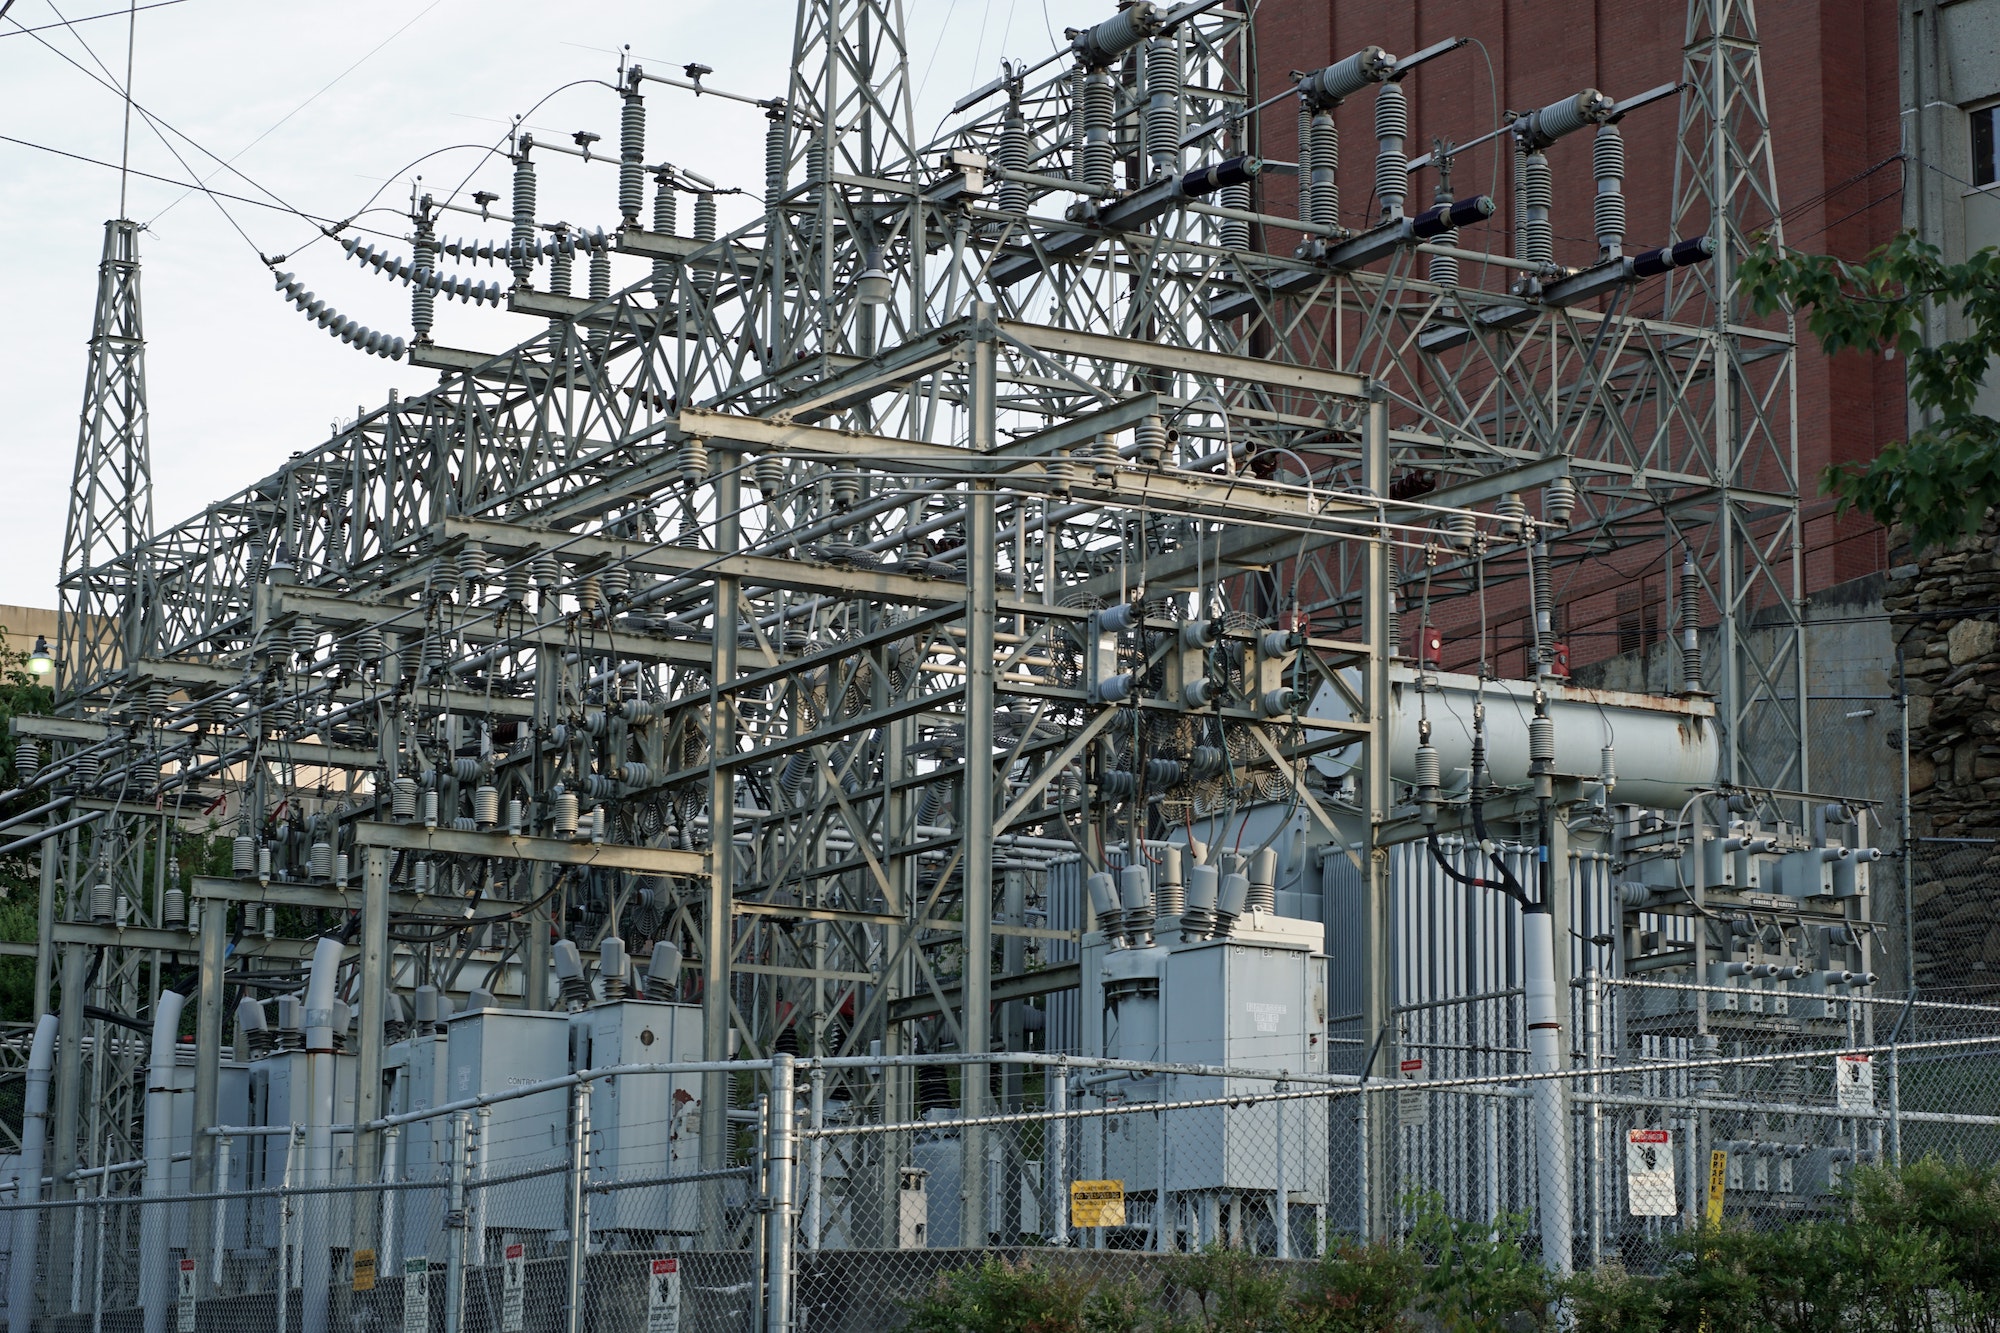 Electric substation in an urban setting.